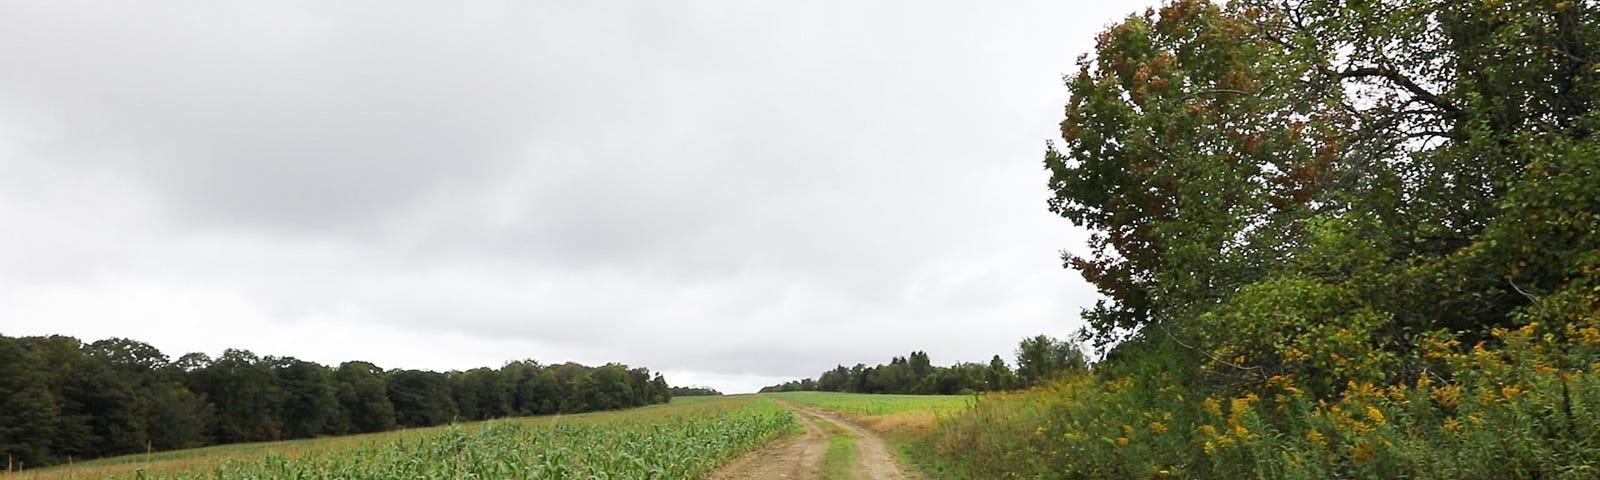 a dirt road winds through an open farm field and trees in the distance